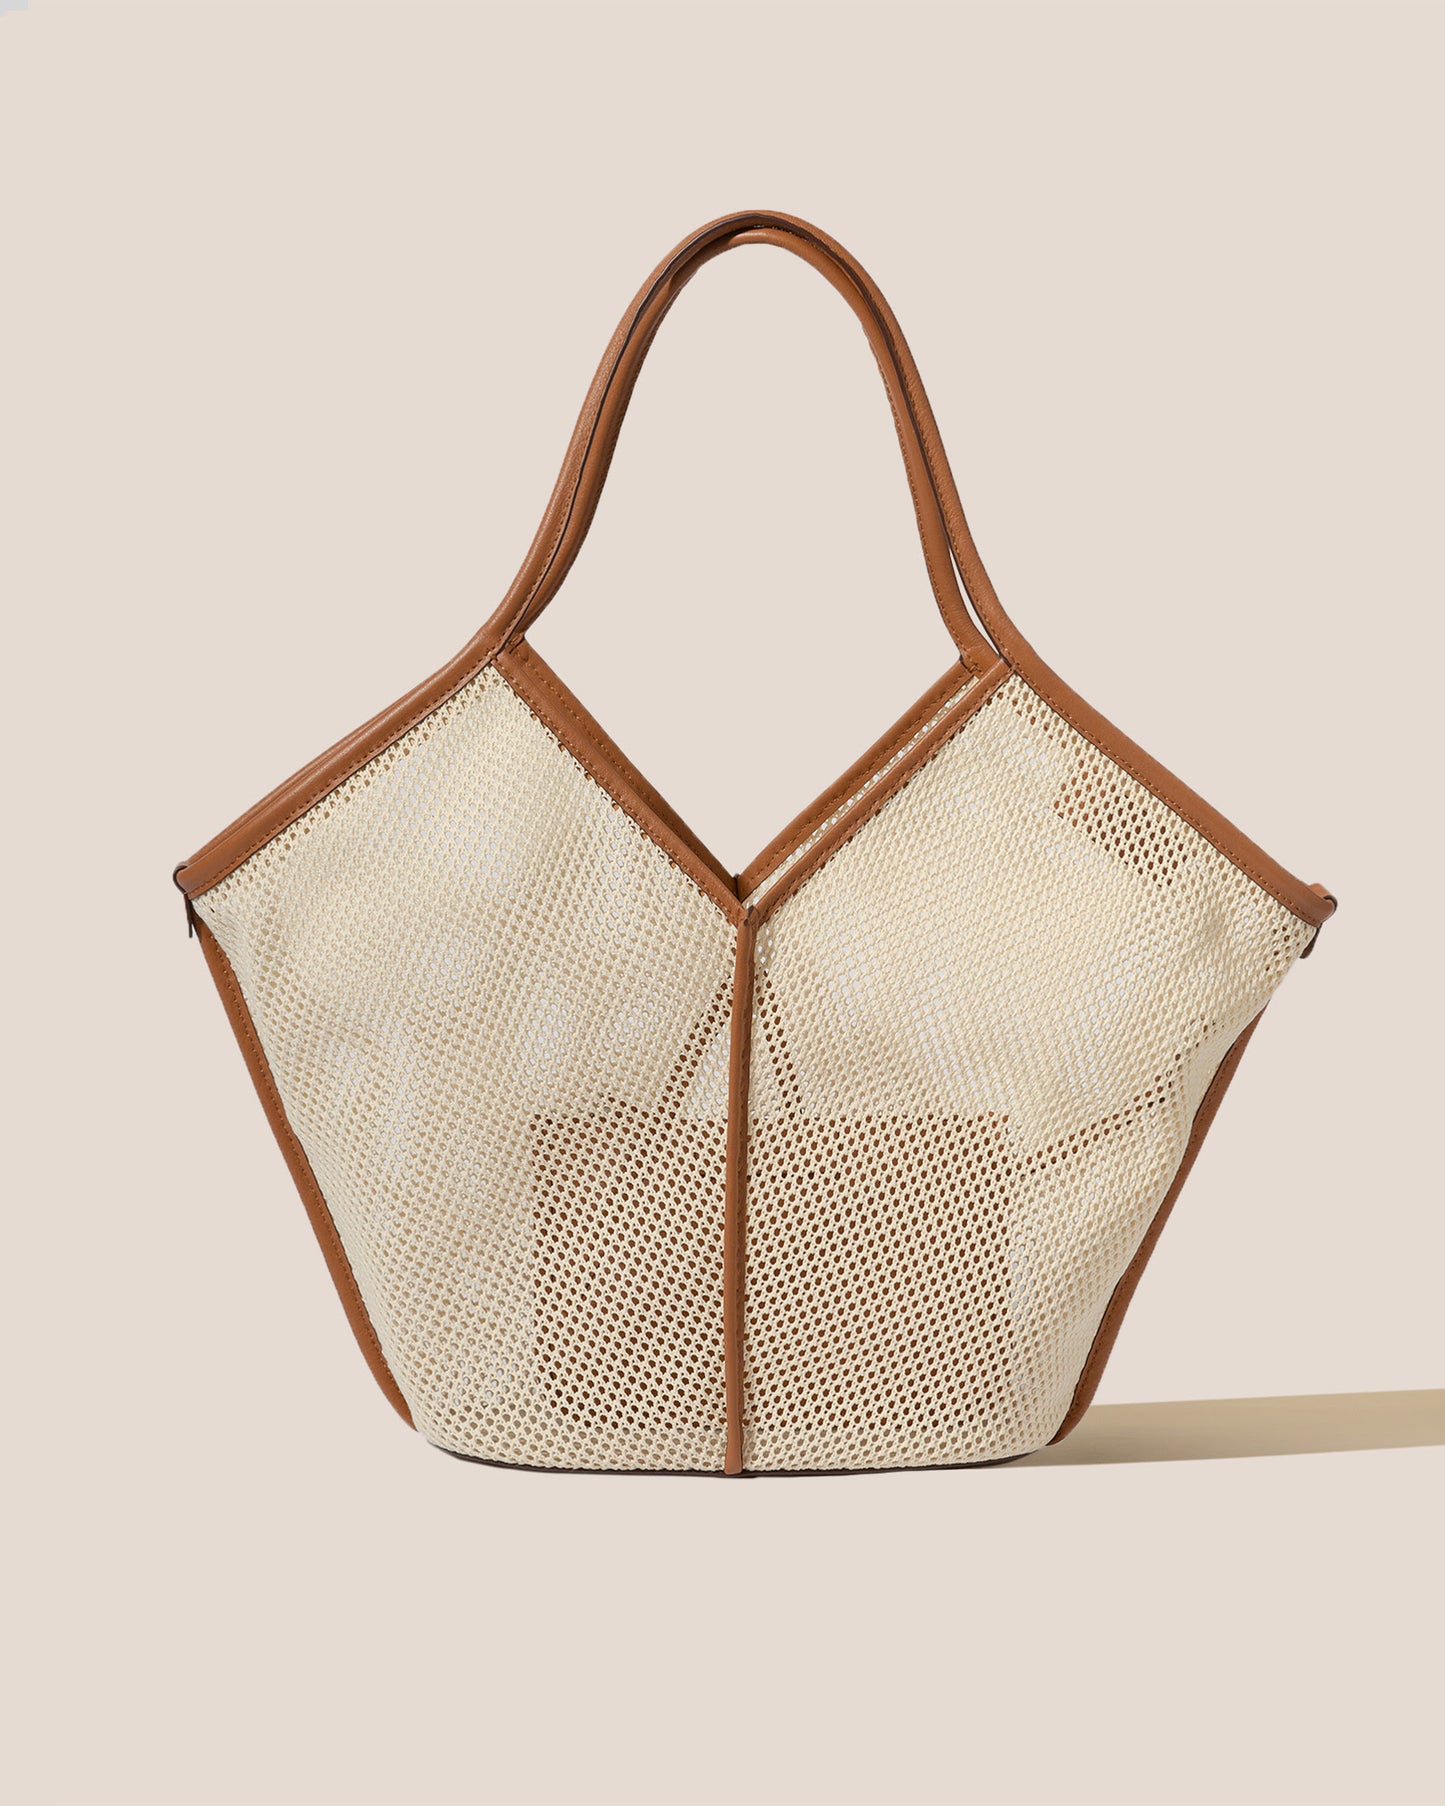 CALELLA NET - Leather-trimmed Tote Bag